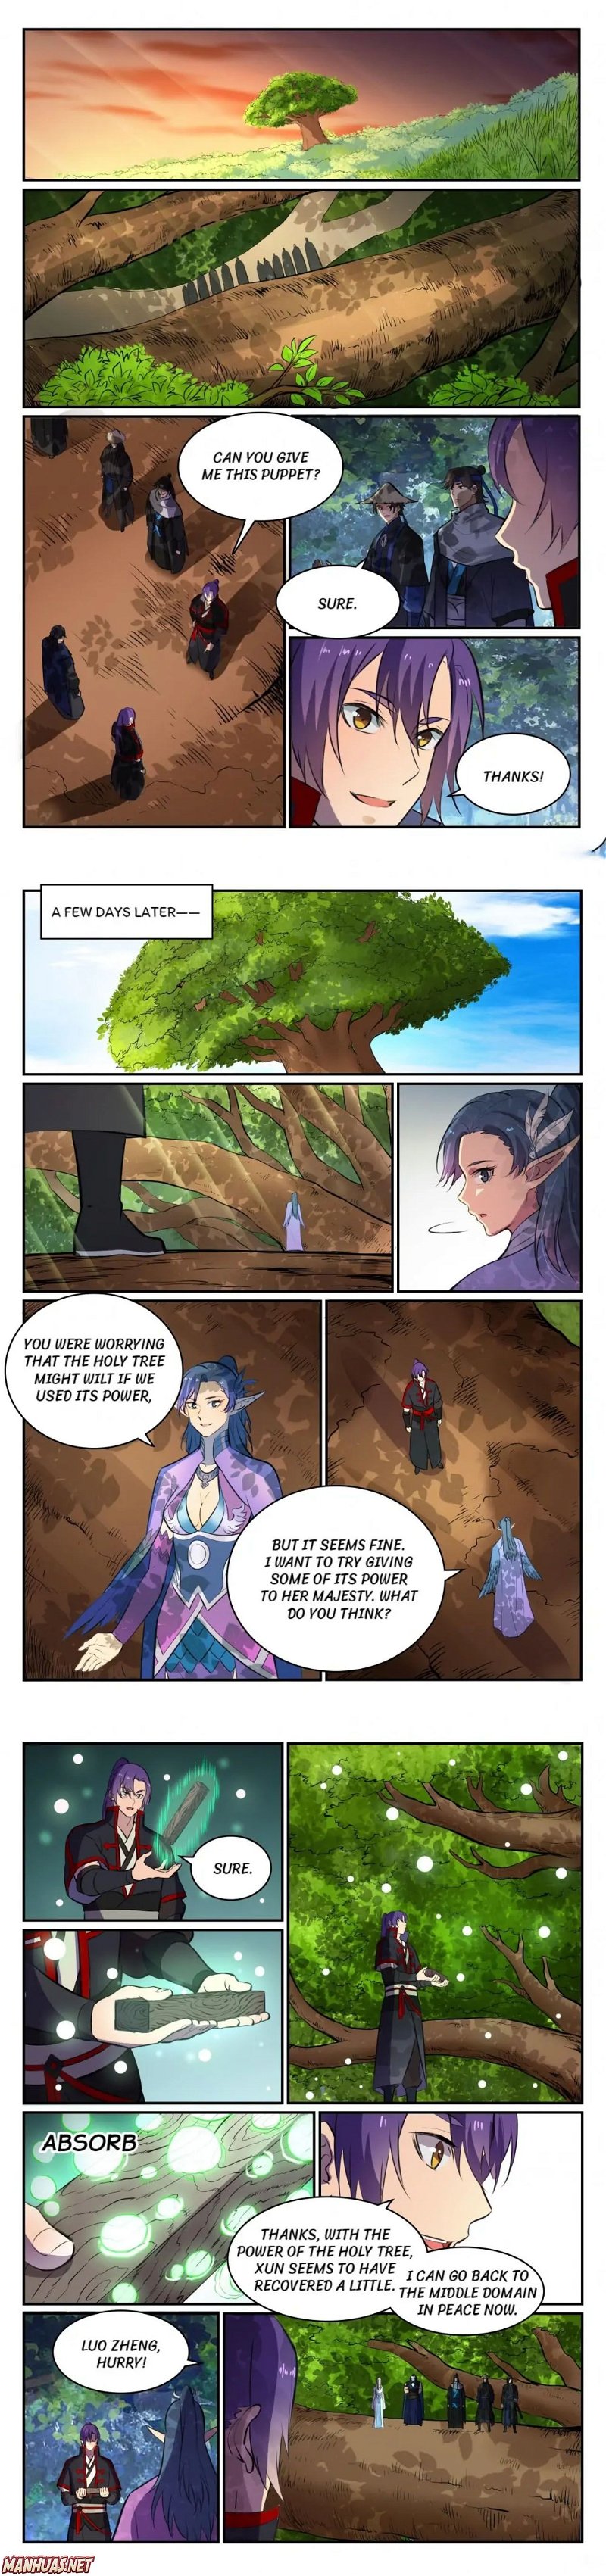 Apotheosis Chapter 472 - Page 4